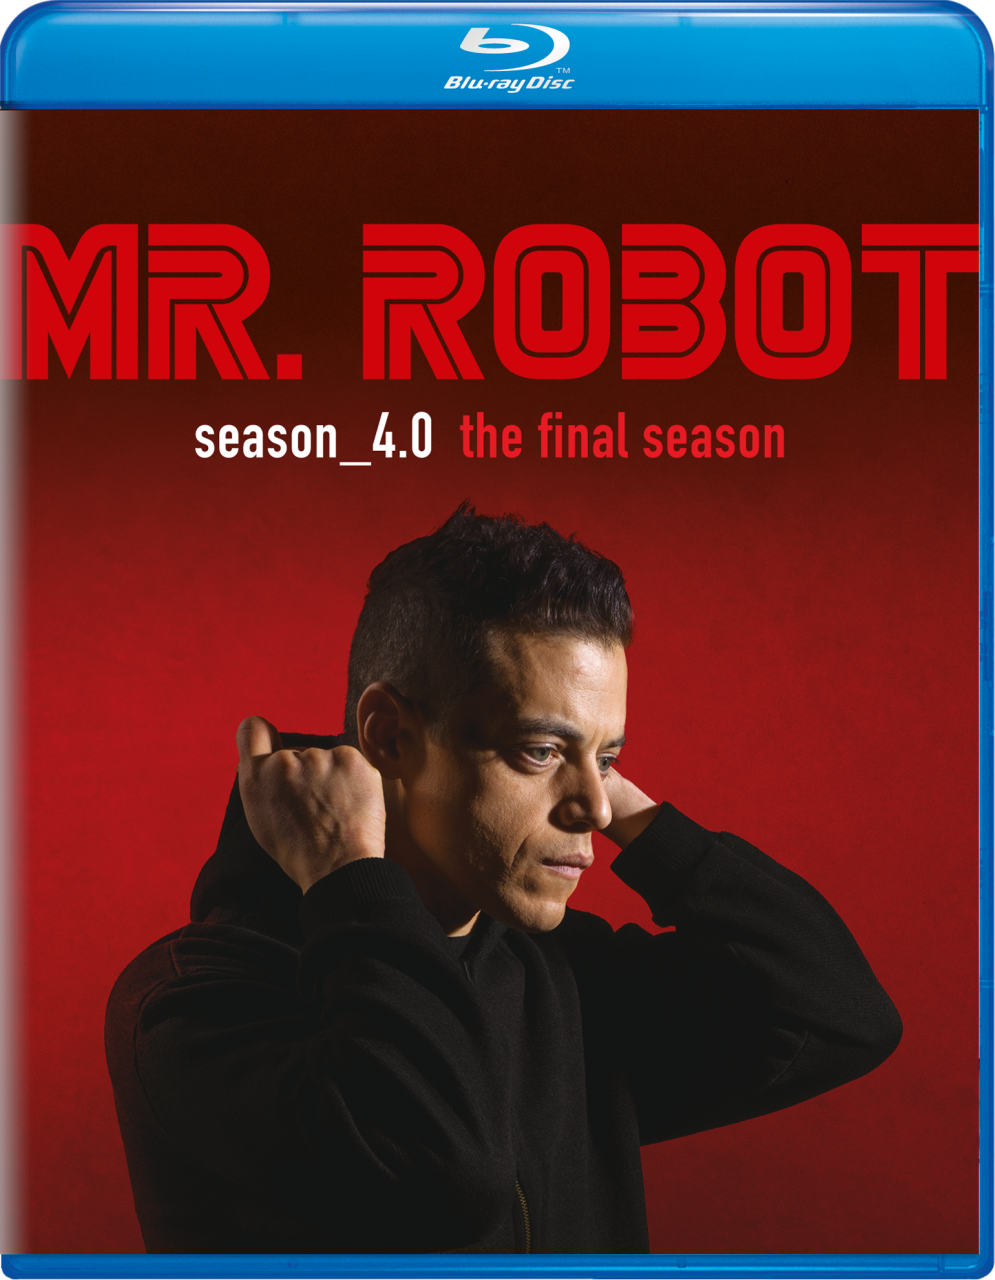 Mr. Robot Season 4.0 The Final Season Blu-Ray Combo Pack cover (Universal Pictures Home Entertainment)